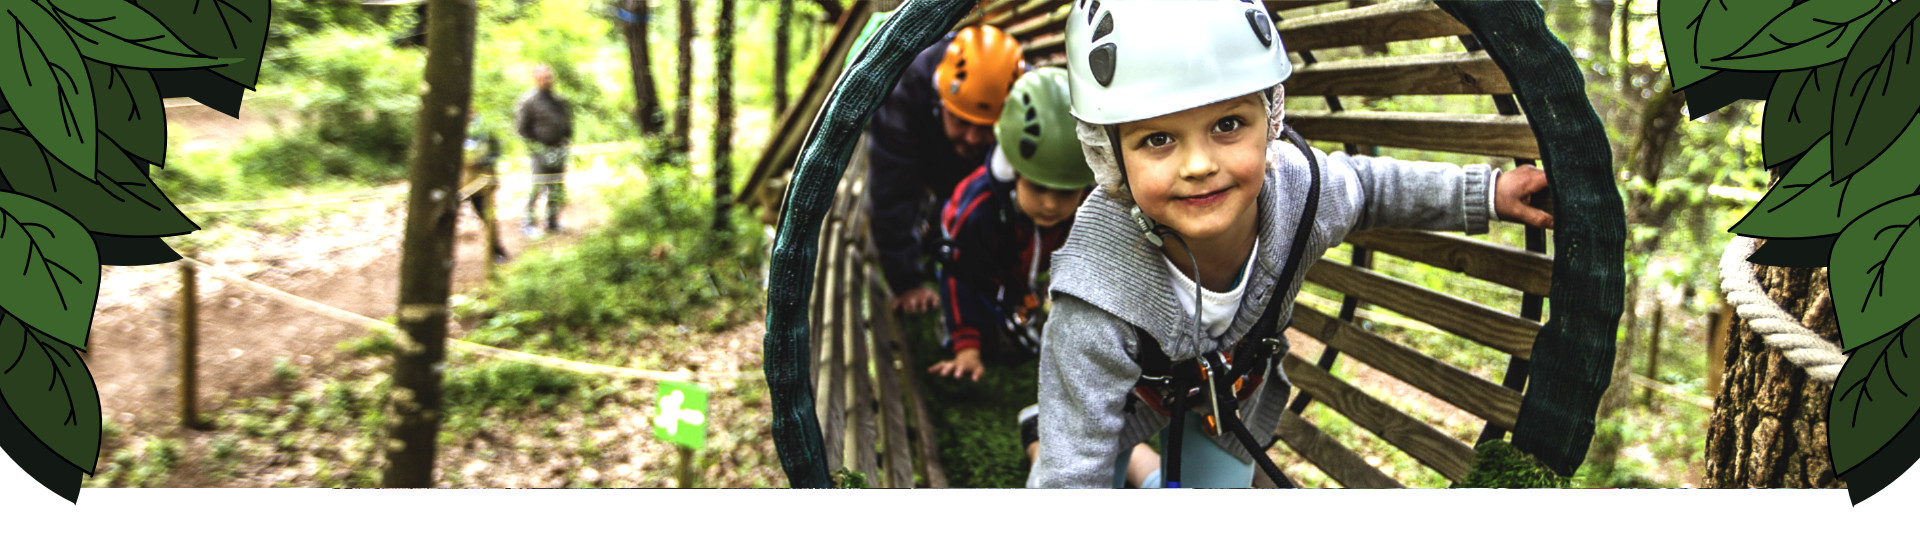 Children with helmets in a wooden tunnel in the trees